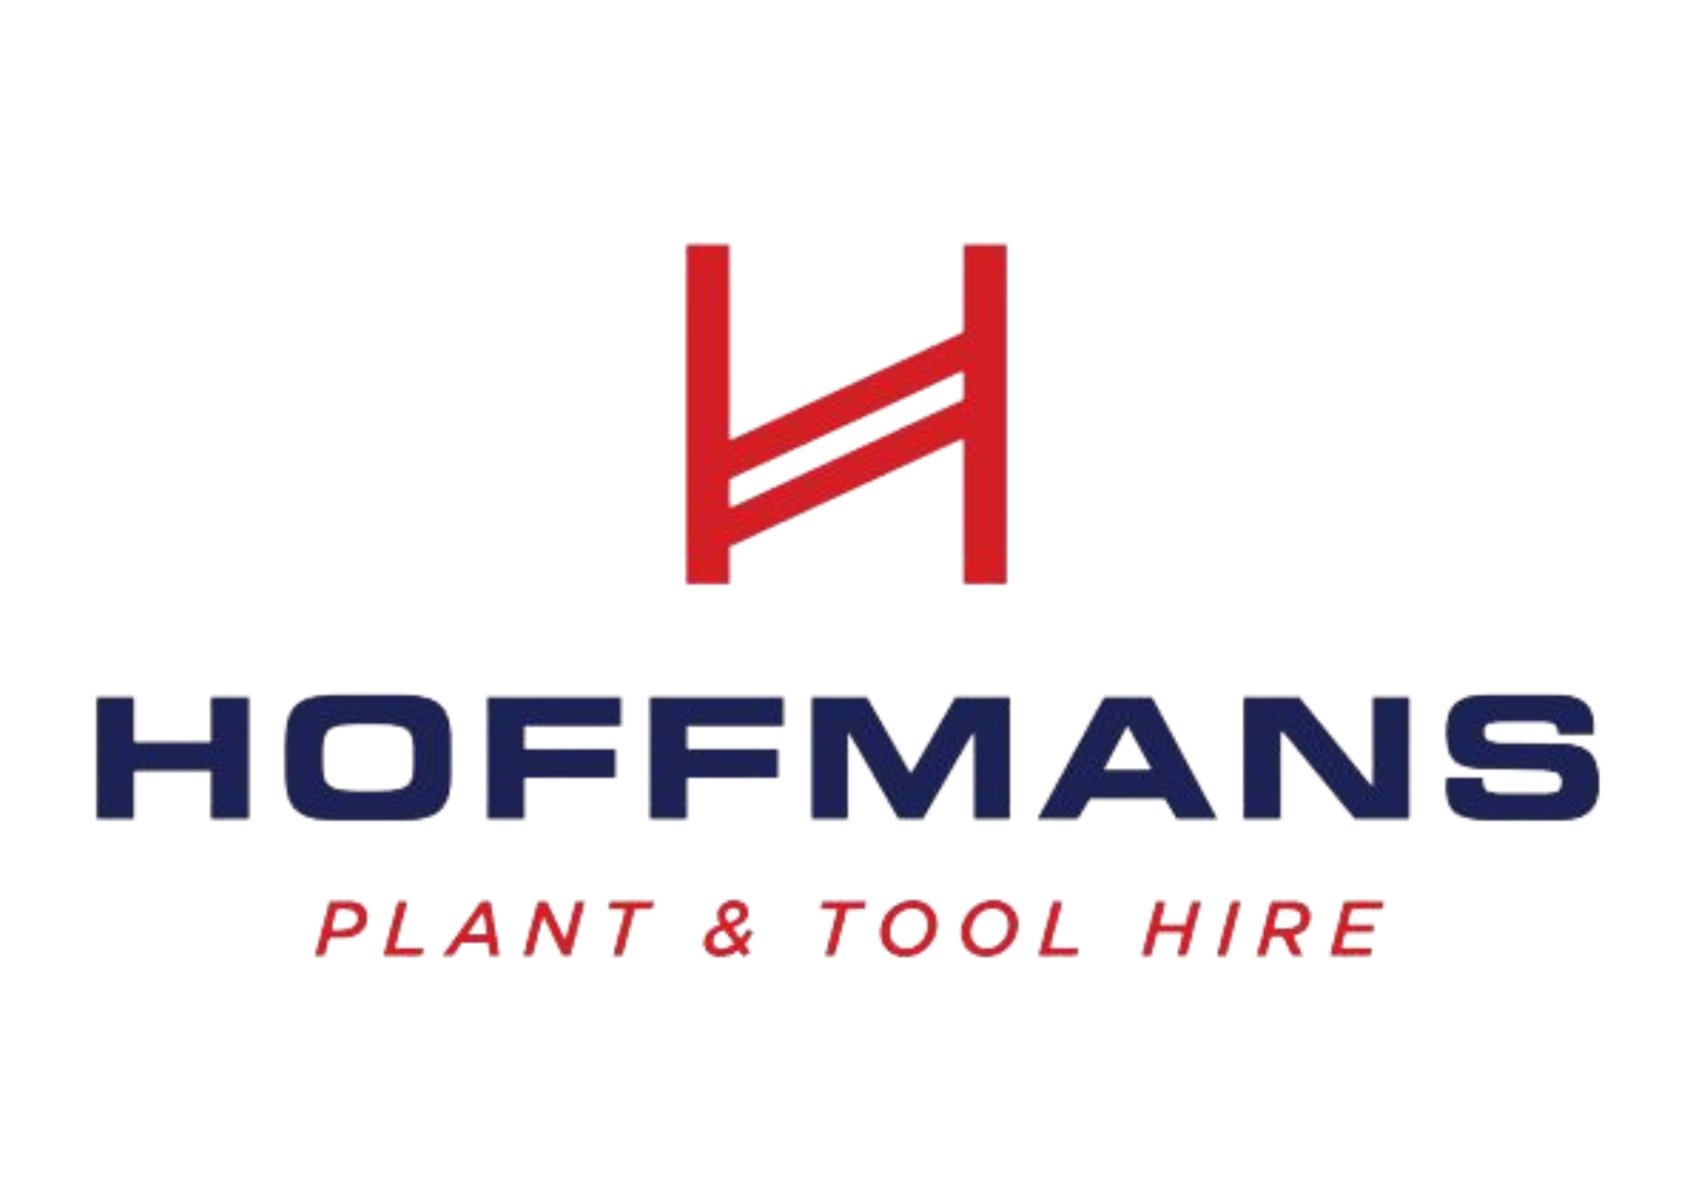 For All Your Plant & Tool Hire Needs In Pretoria & Surroundings